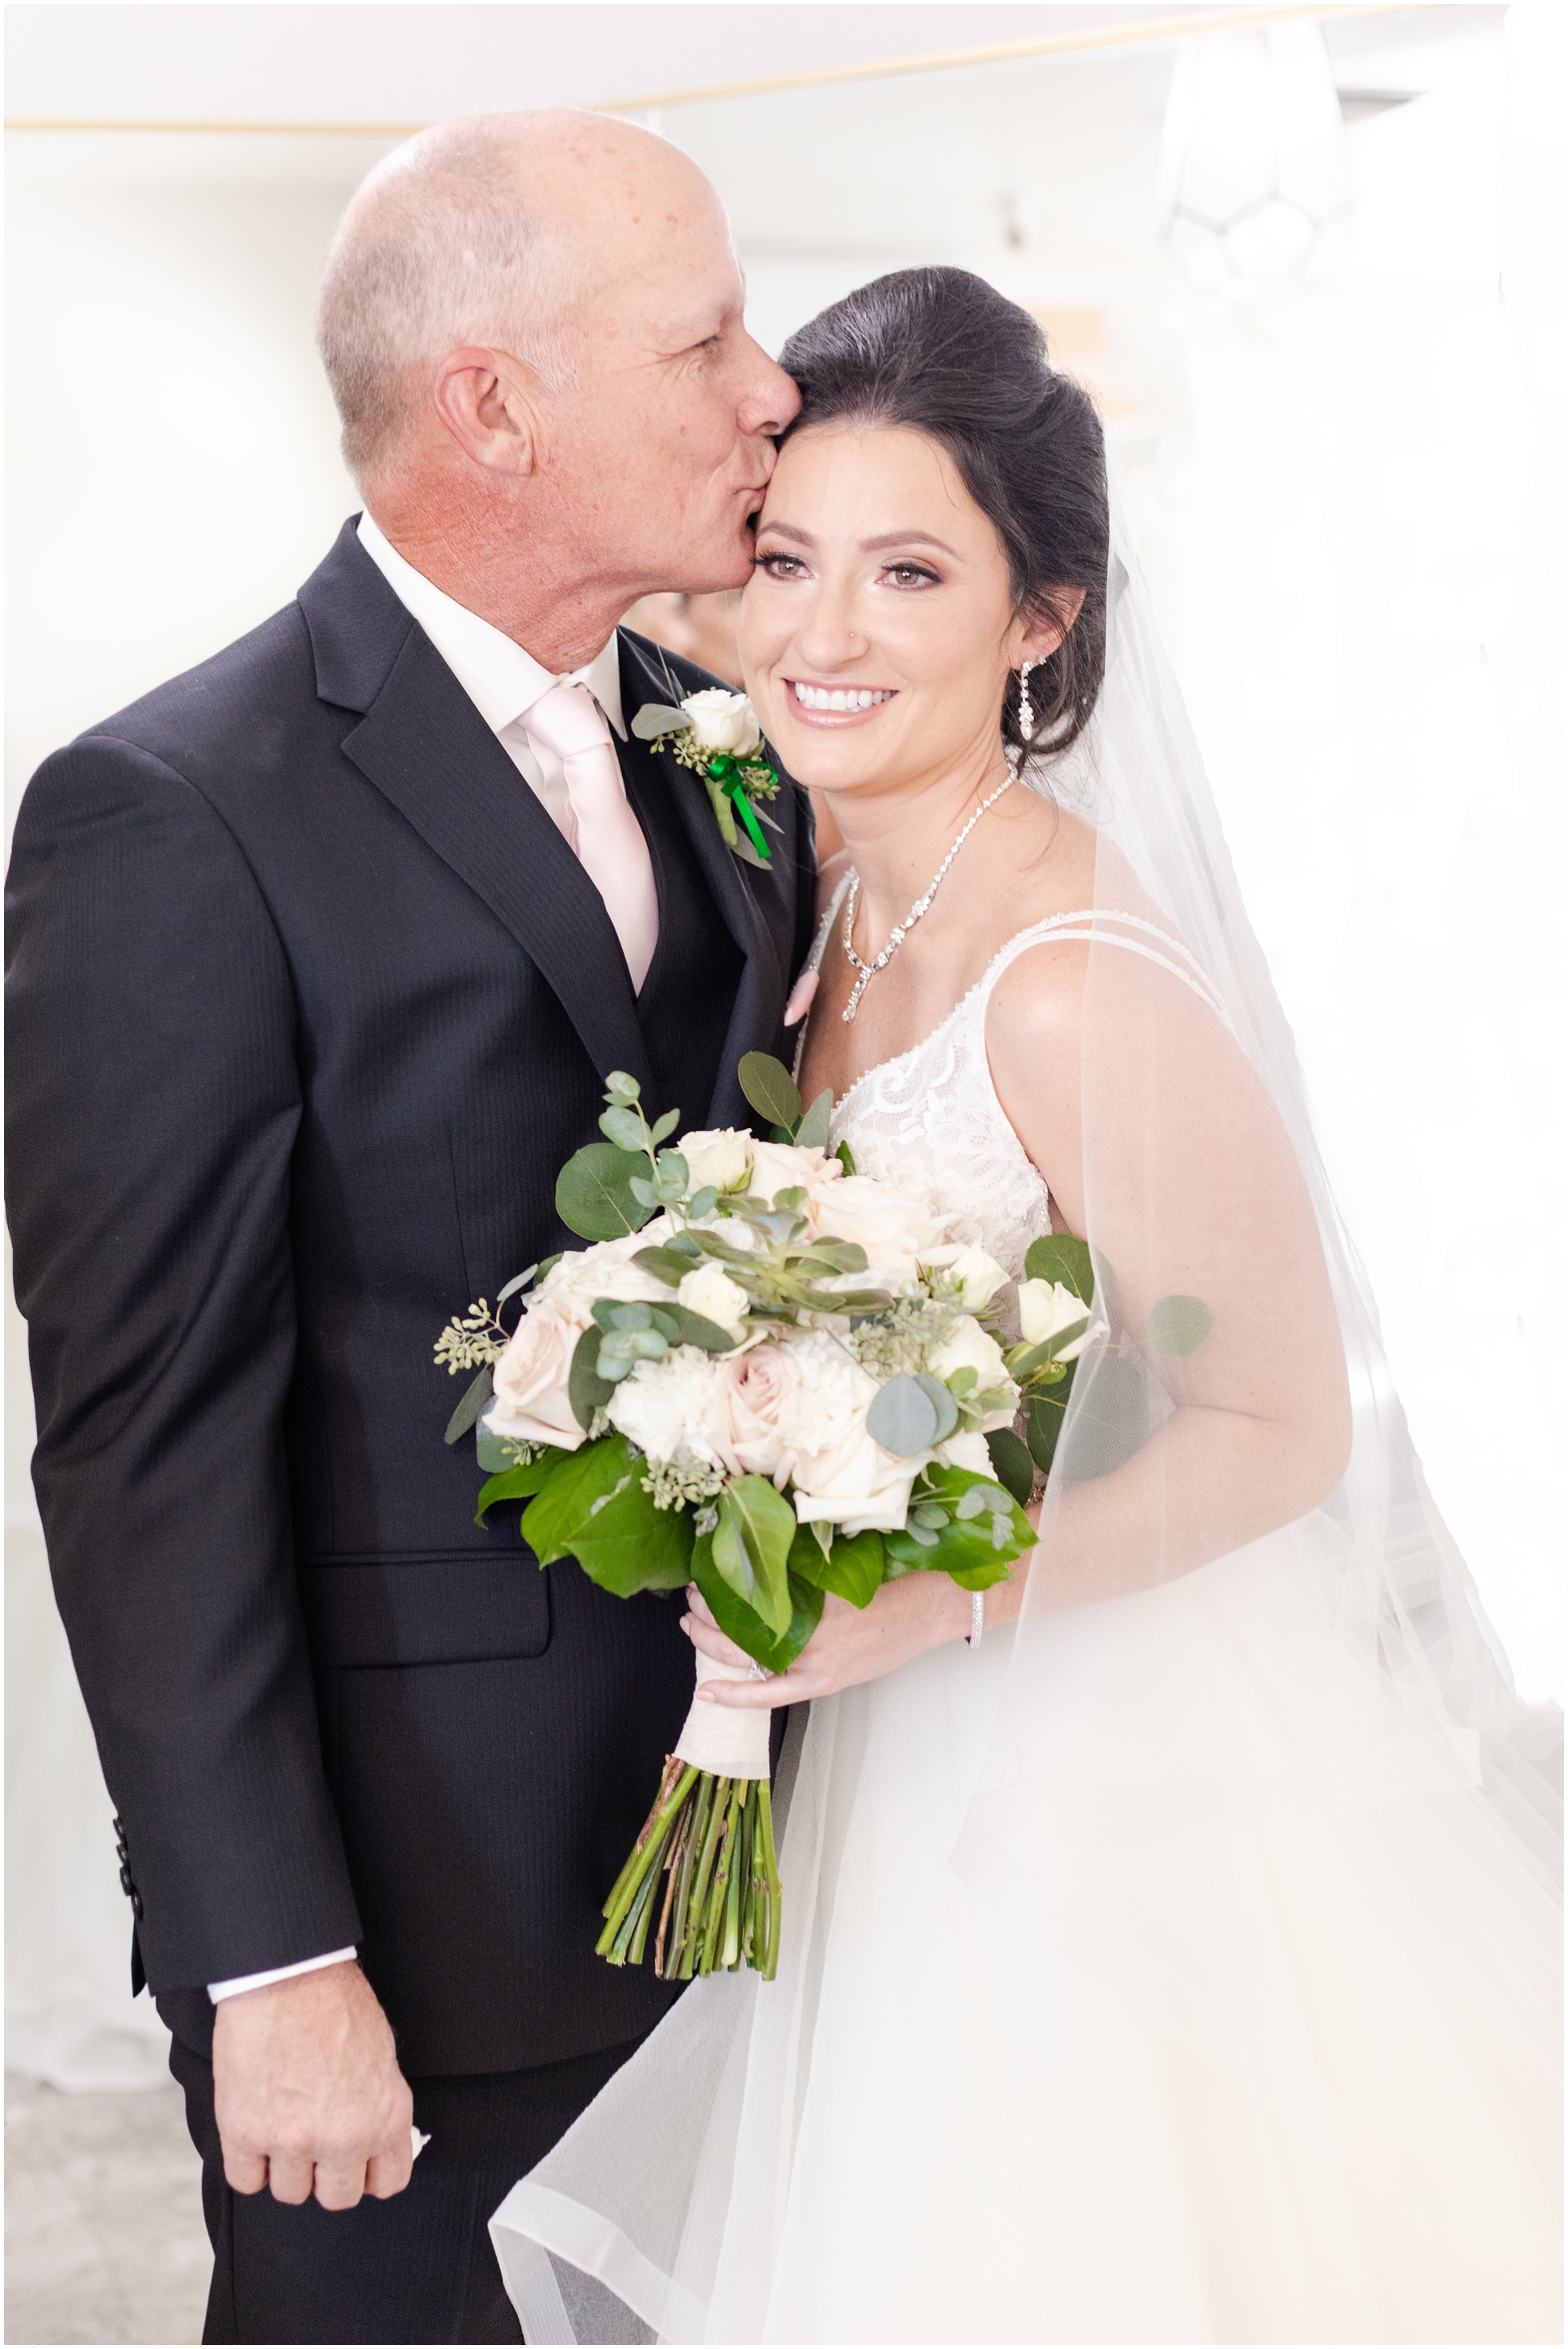 Dad kissing bride's forehead while bride smiles